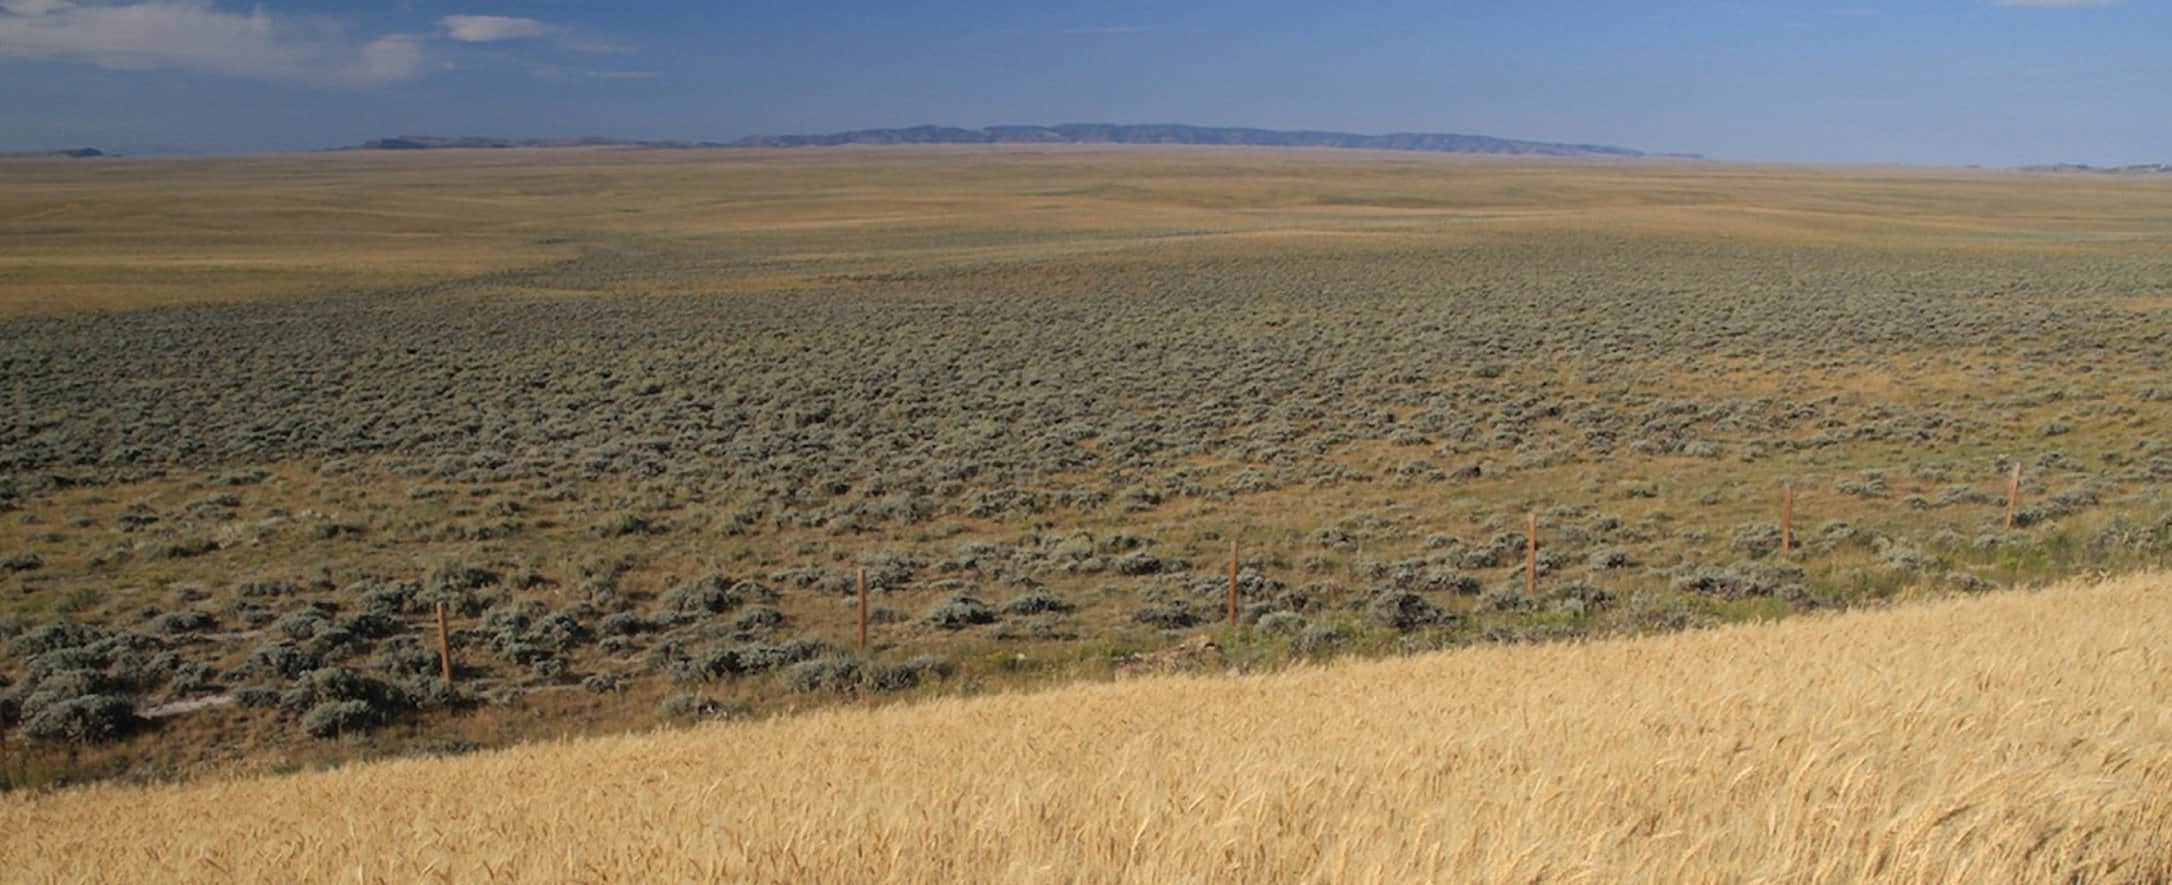 Cultivation crops like wheat (foreground) destroys vital sage grouse habitat. Photo by Conservation Media.